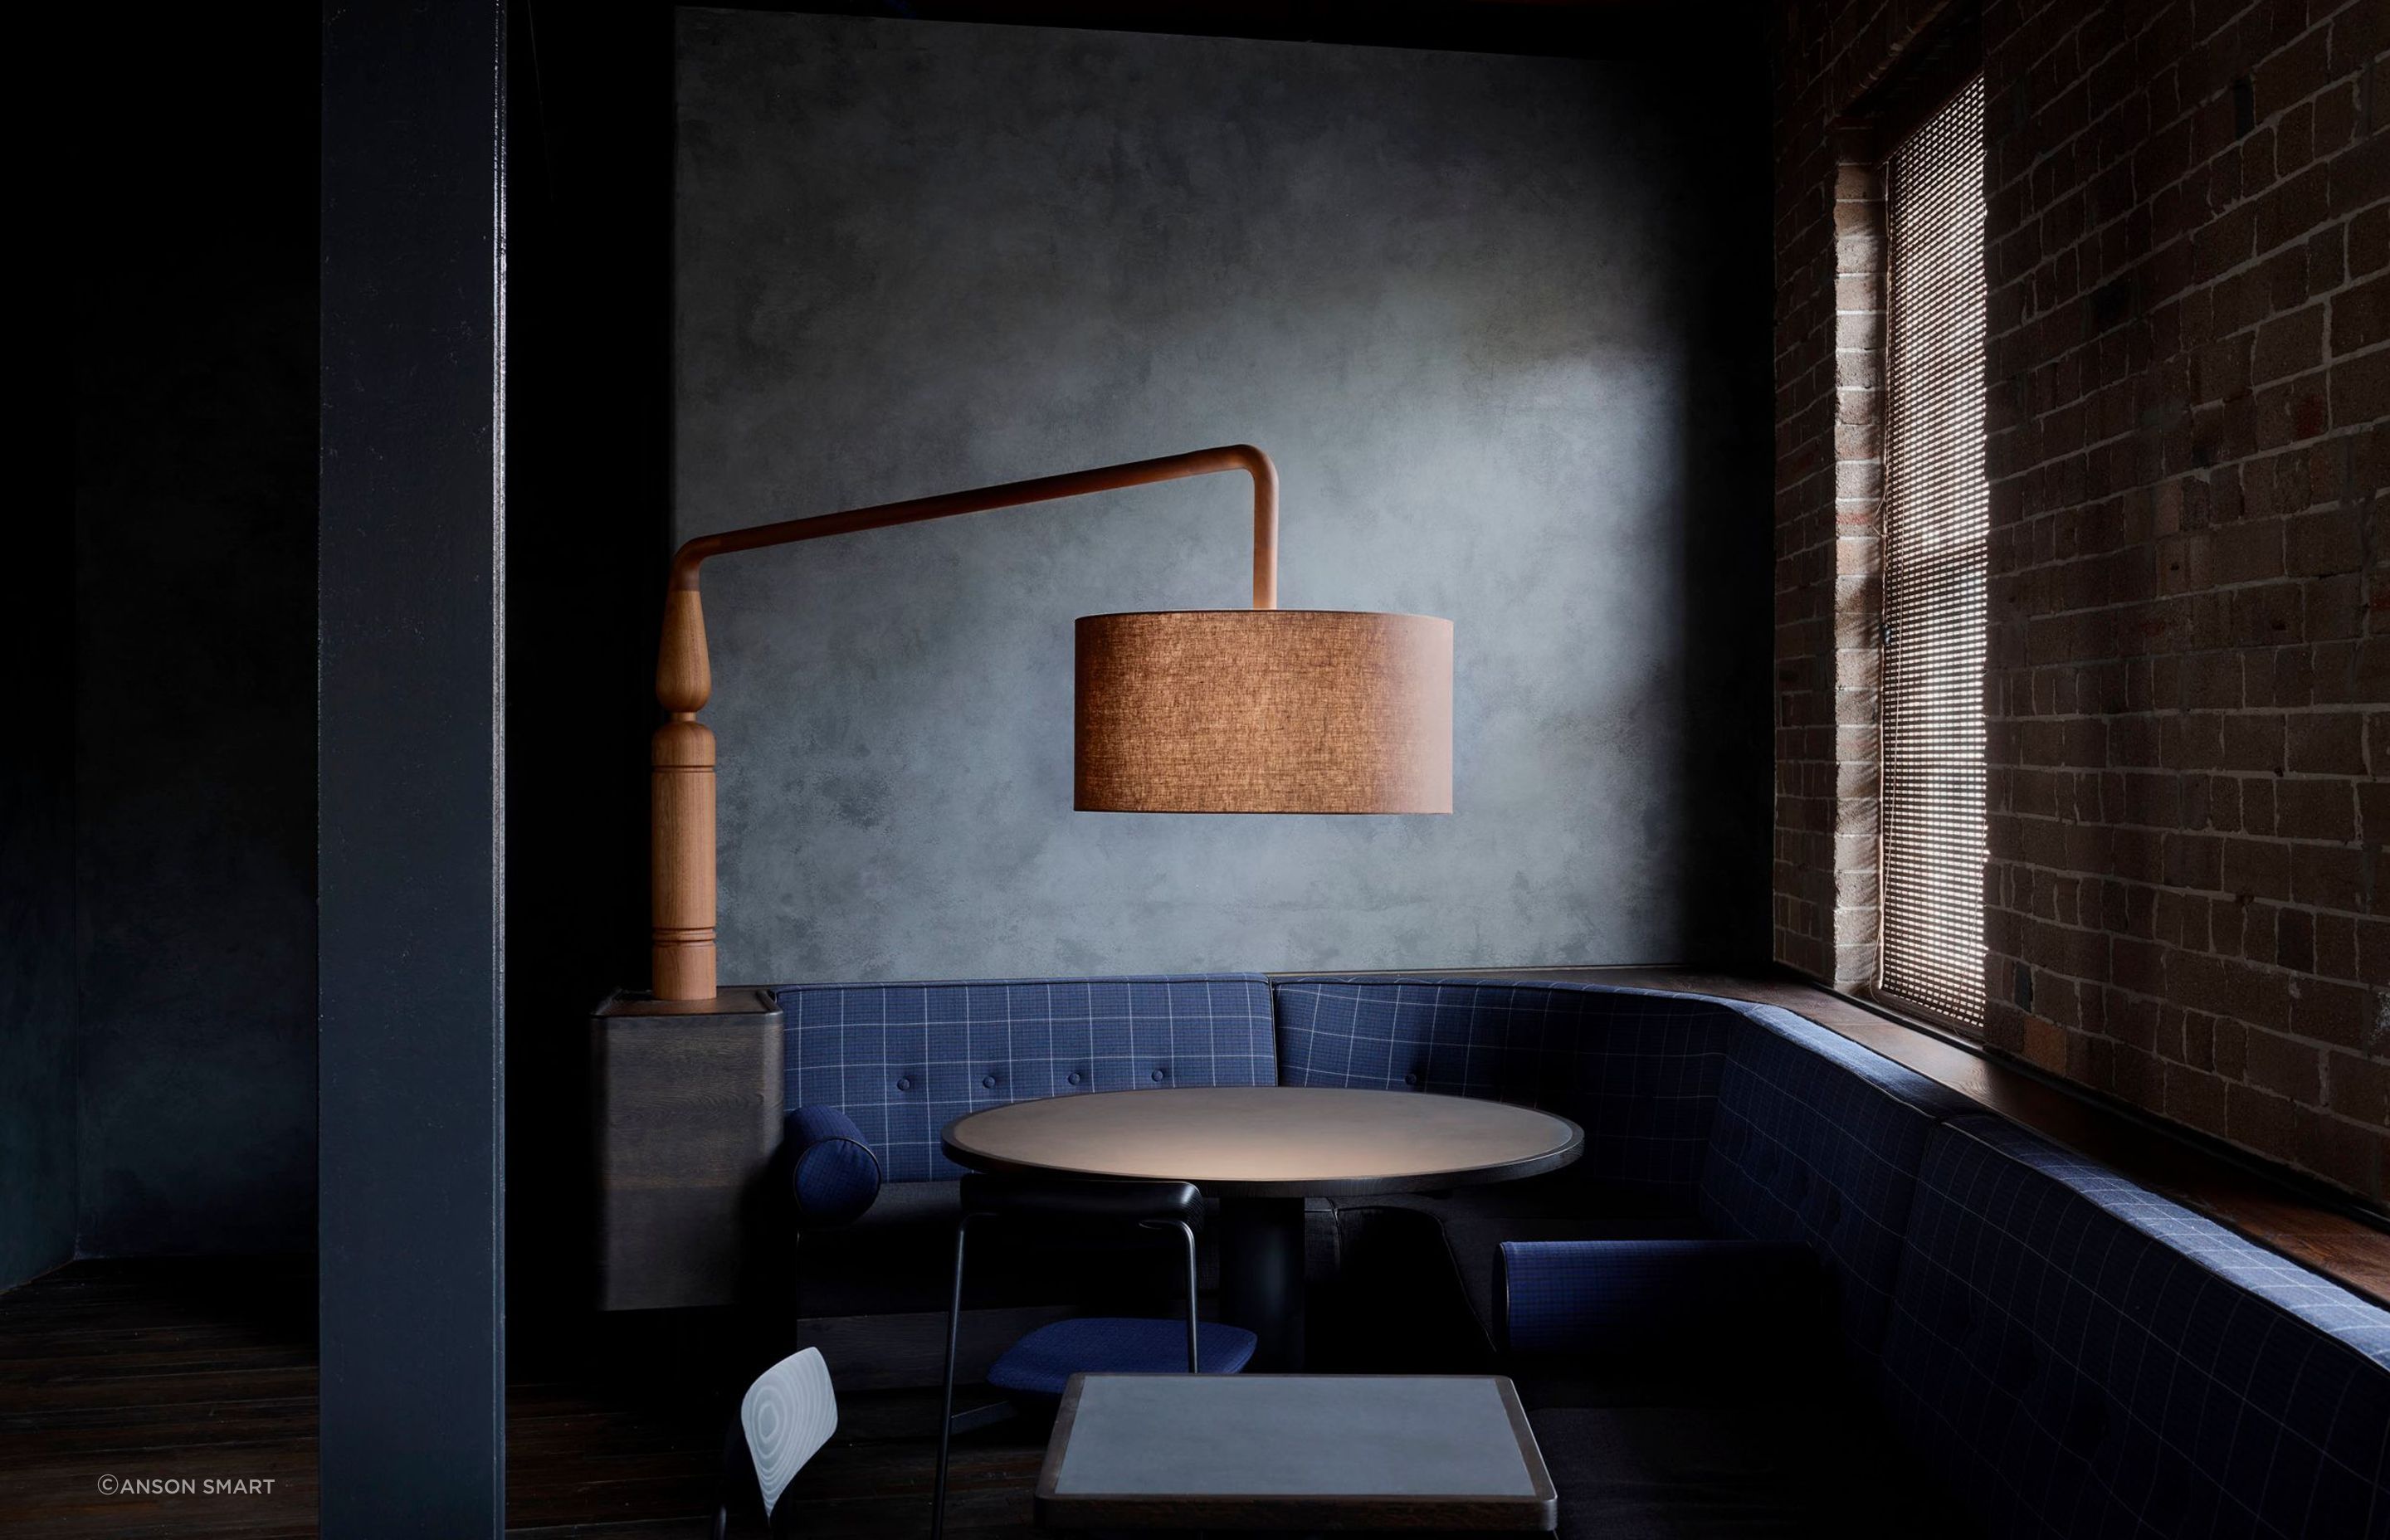 The seating areas are dimly lit with custom timber lamps, each one unique.